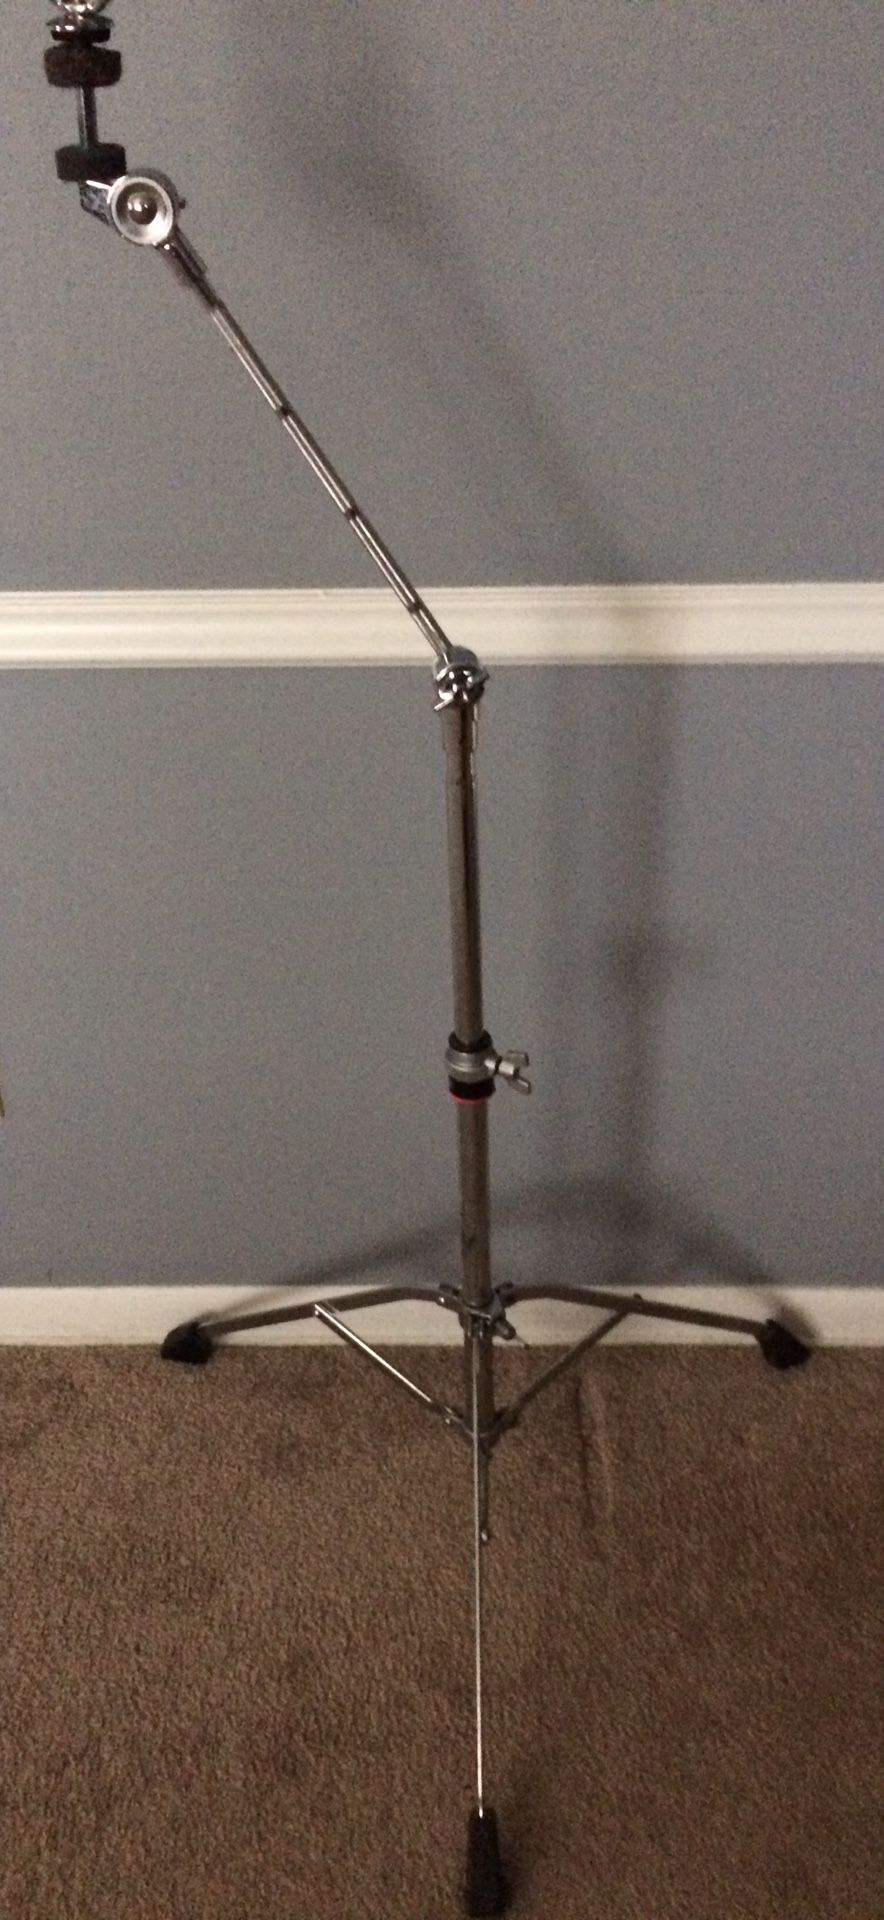 Yamaha professional heavy-duty cymbal stand - great condition!